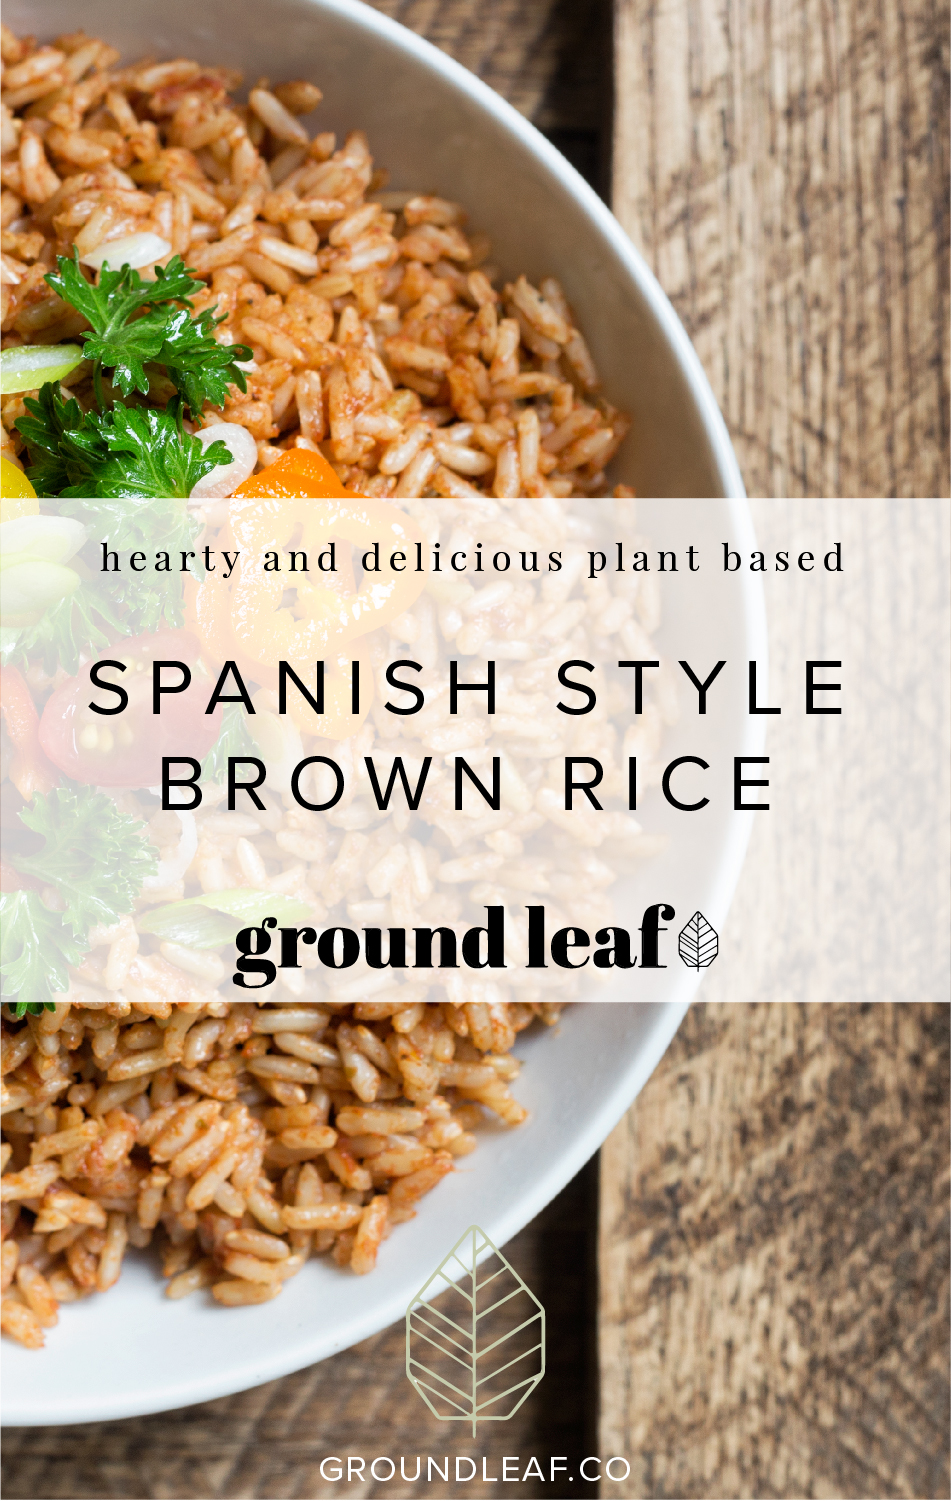 Delicious and fast! Make this Spanish style brown rice in your instant pot!